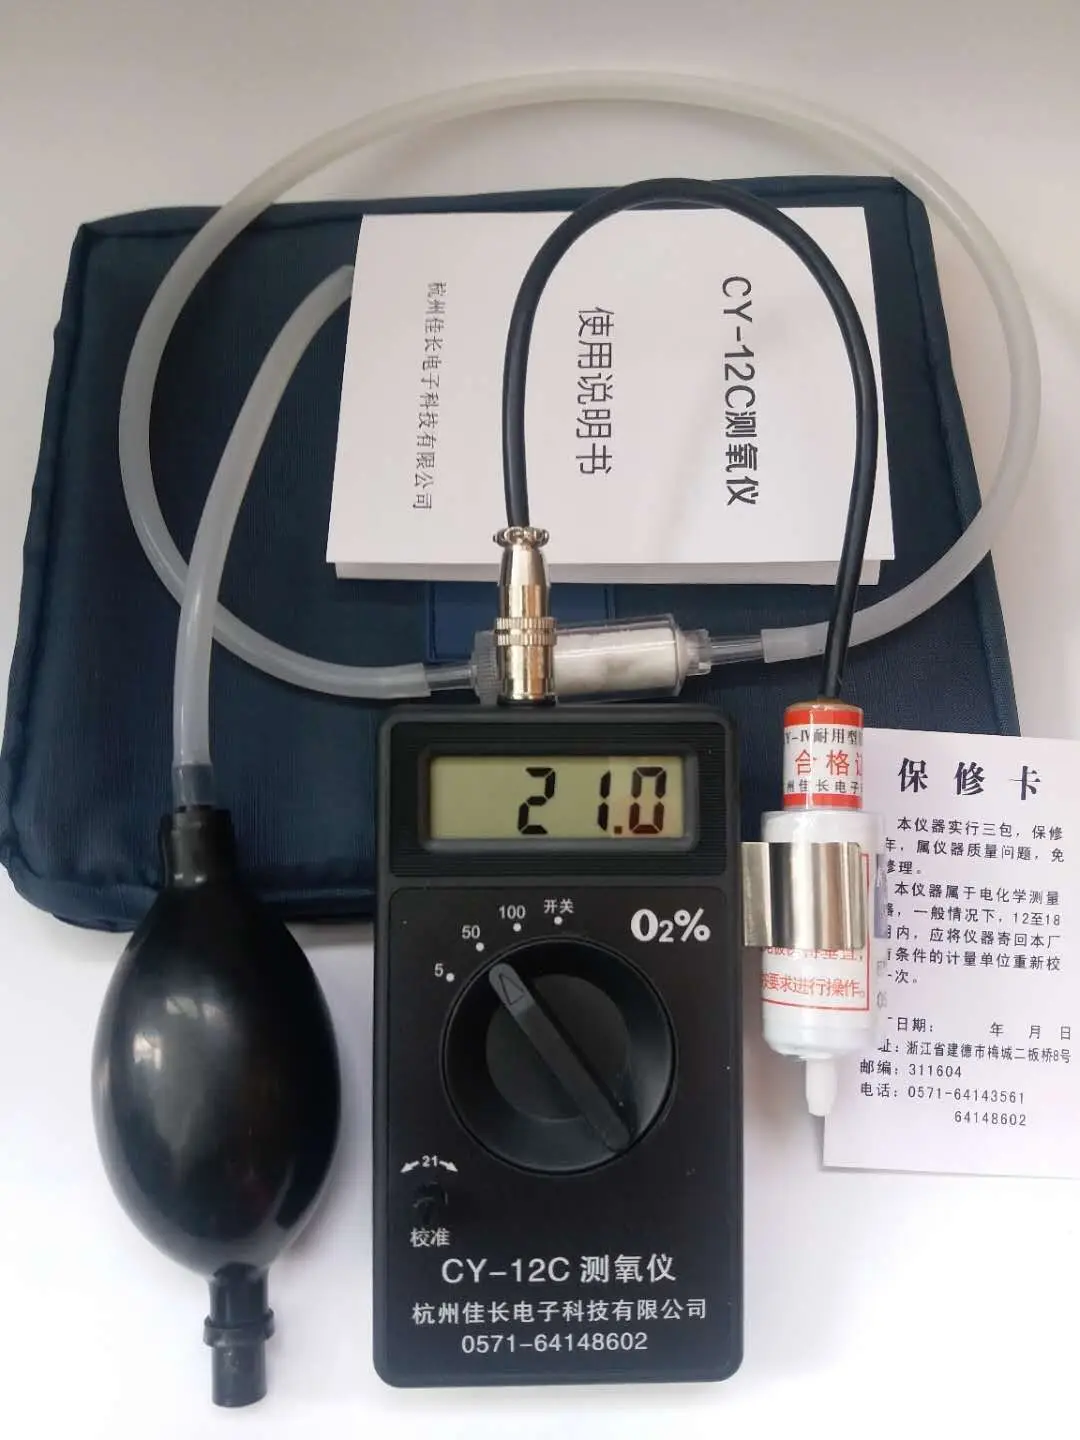 

CY-12C Oxygen Detector Professional O2 Oxygen Concentration Content Tester Meter High Accuracy Monintor Gas Analyzer Detector